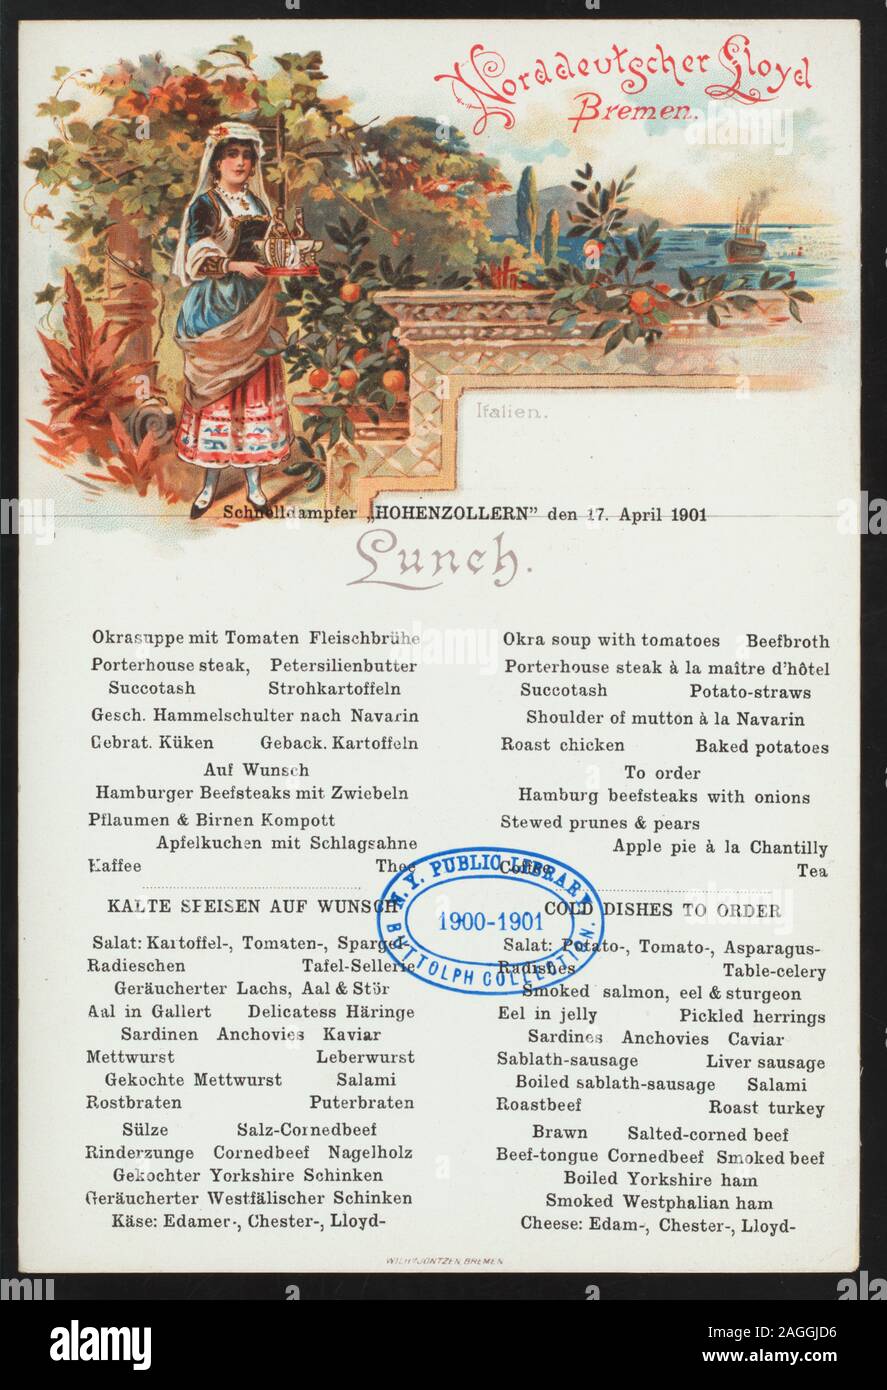 GERMAN & ENGLISH; ILLUSTRATION OF ITALIAN WOMAN IN PROVINCIAL COSTUME SERVING WINE ON A BALCONY Citation/Reference: 1901-0942; LUNCH [held by] NORDDEUTSCHER LLOYD BREMEN [at] SCHNELLDAMPFER HOHENZOLLERN (SS;) Stock Photo